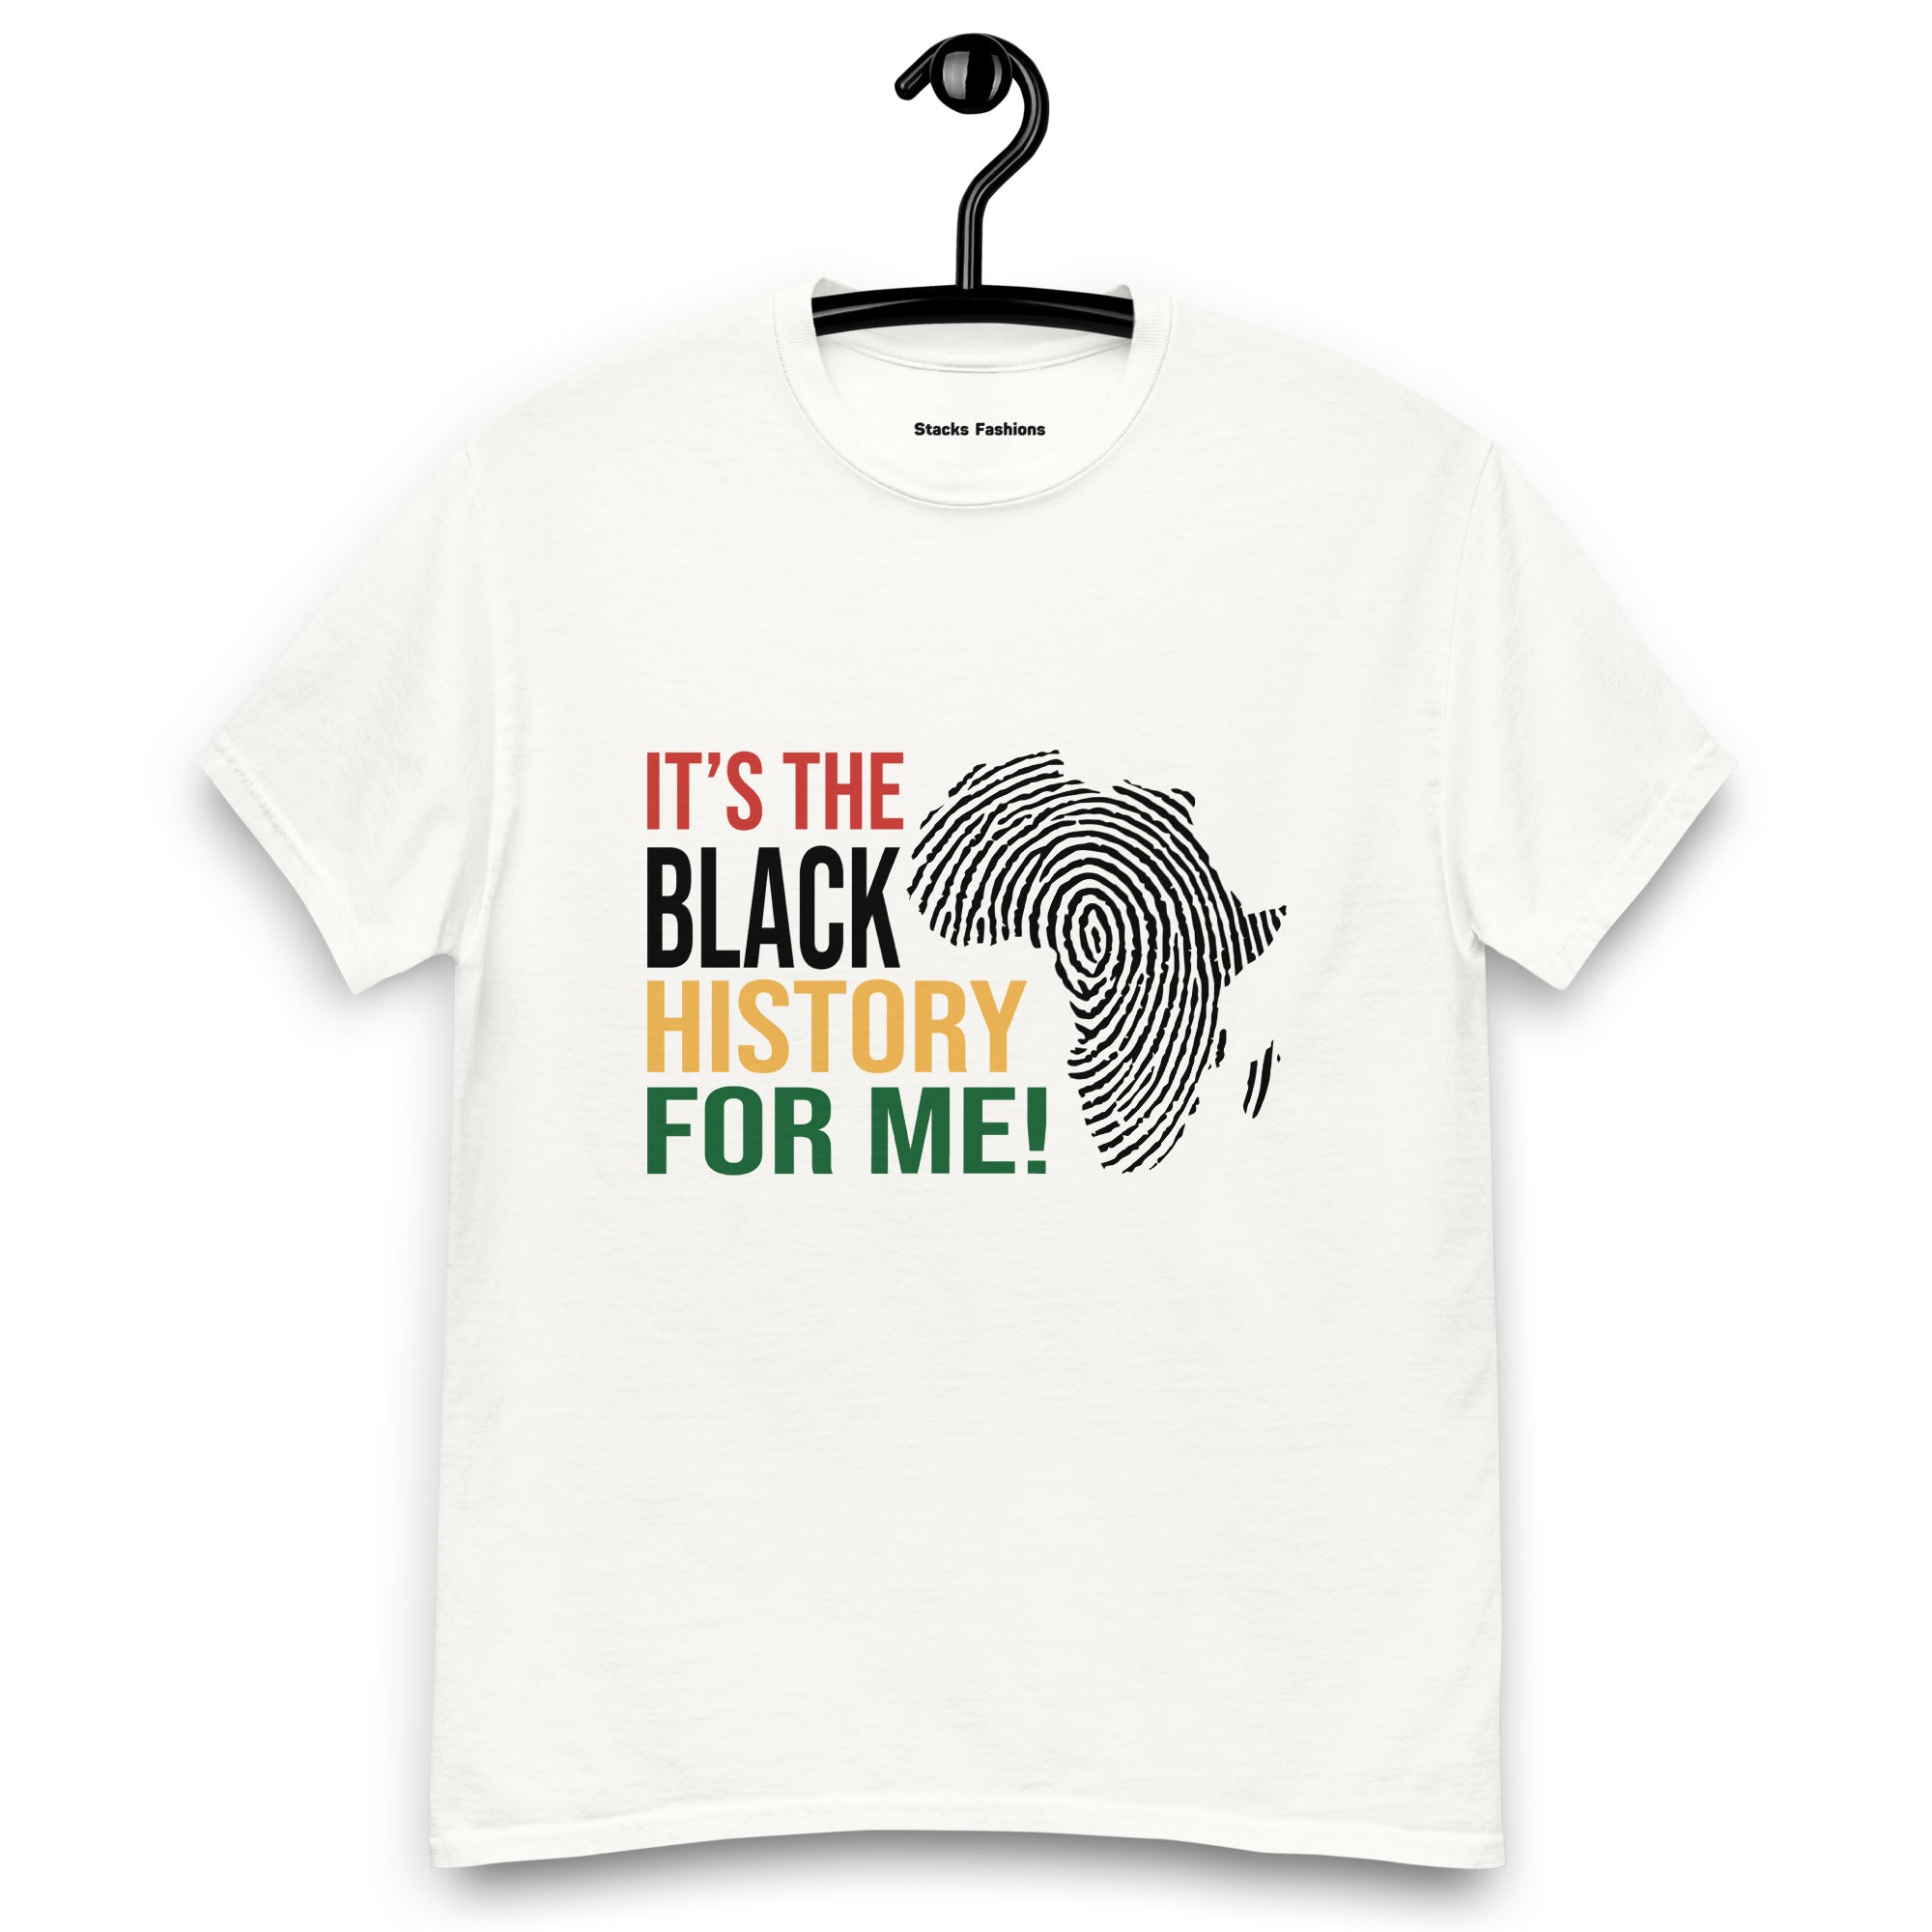 Black History For Me! Tee